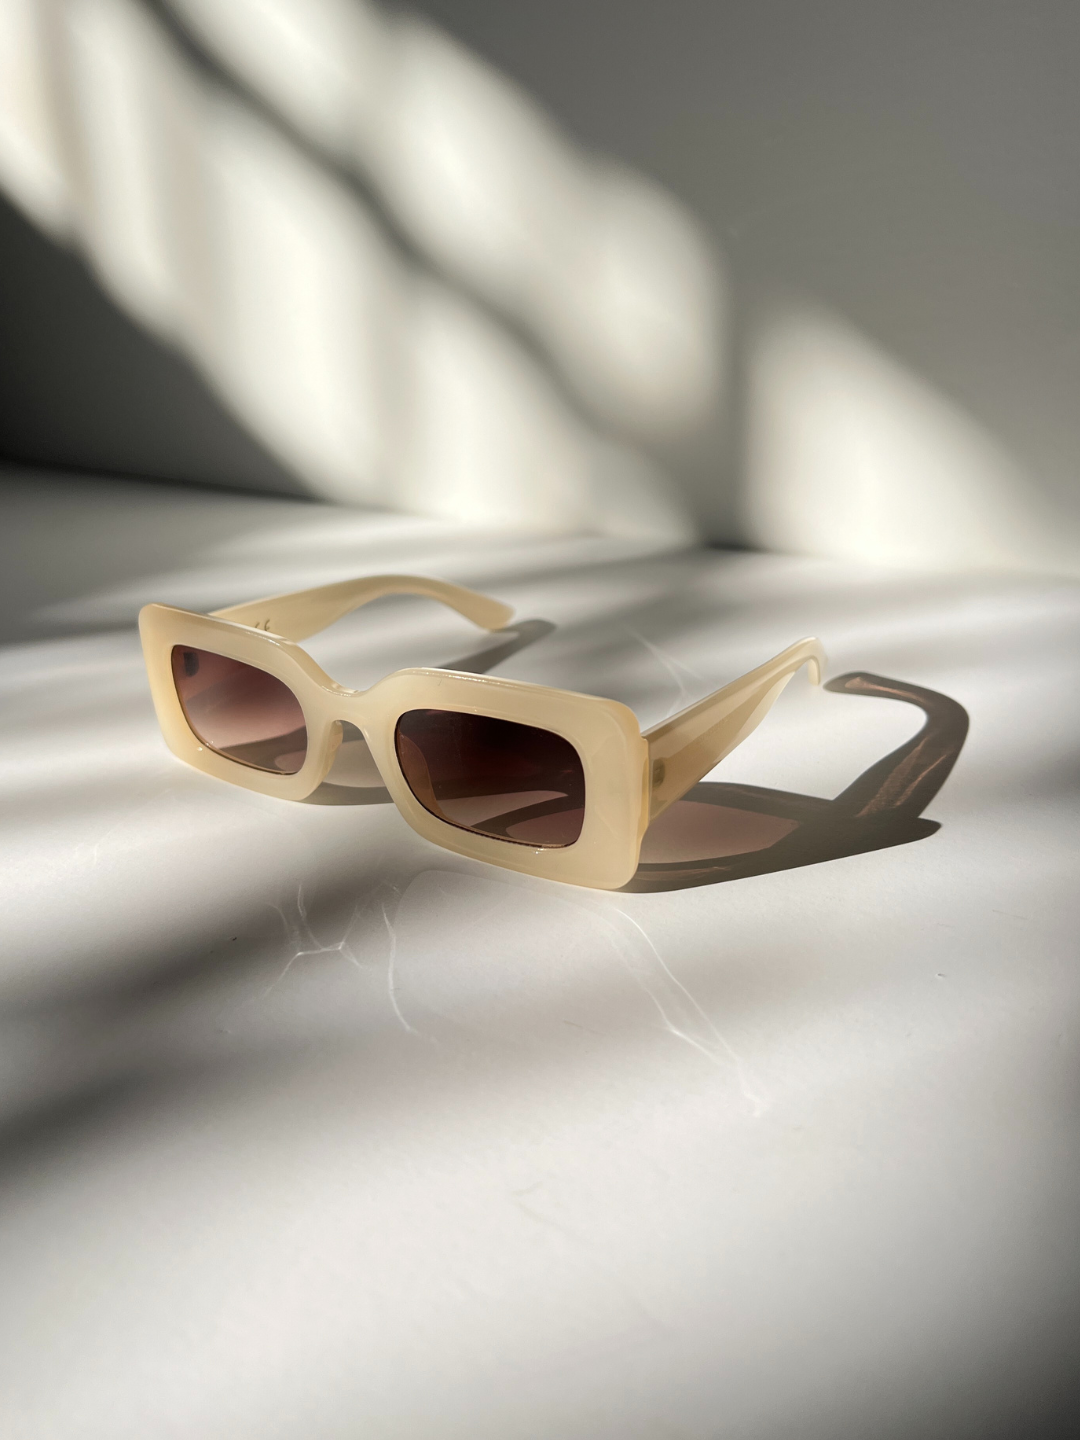 Kids rectangle sunglasses in cream, on a grey background with areas of sunlight, creating shadows of the sunglasses.